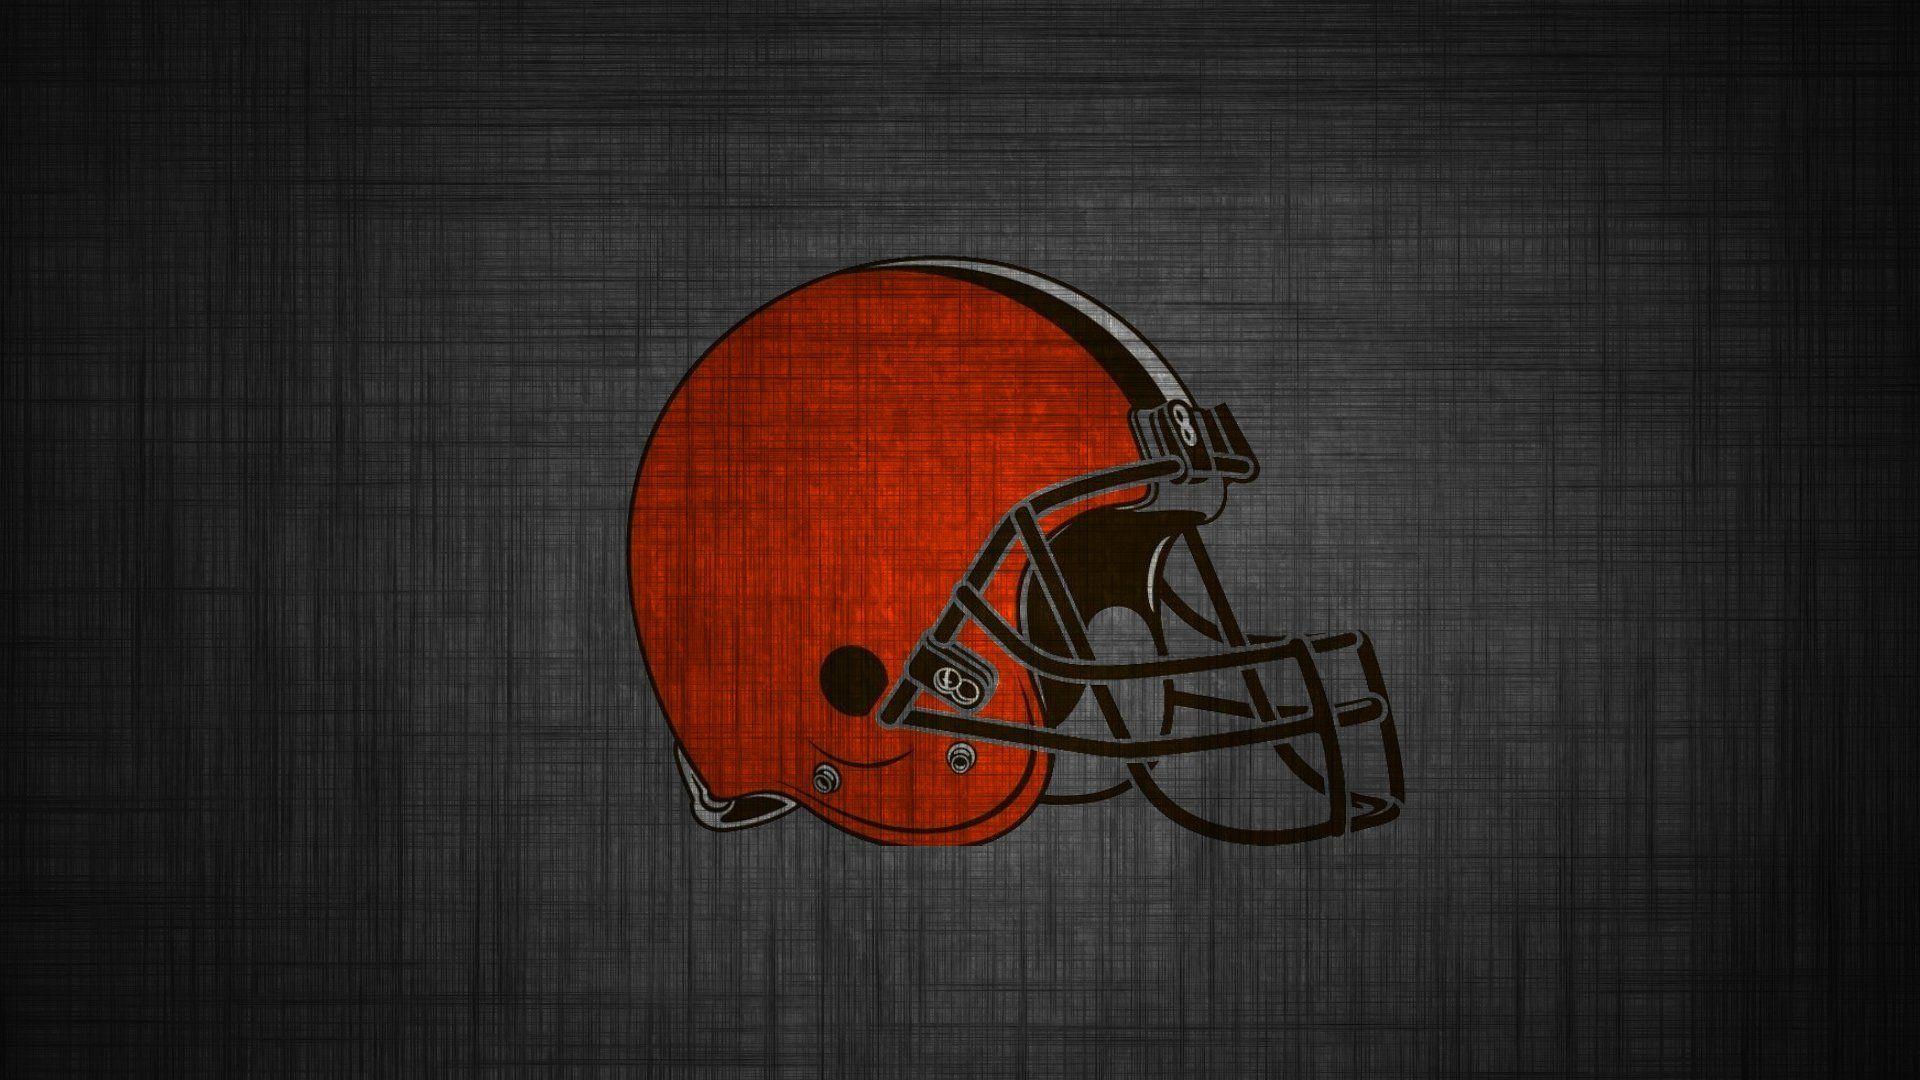 Cleveland Browns Schedule 2016 Wallpapers - Wallpaper Cave